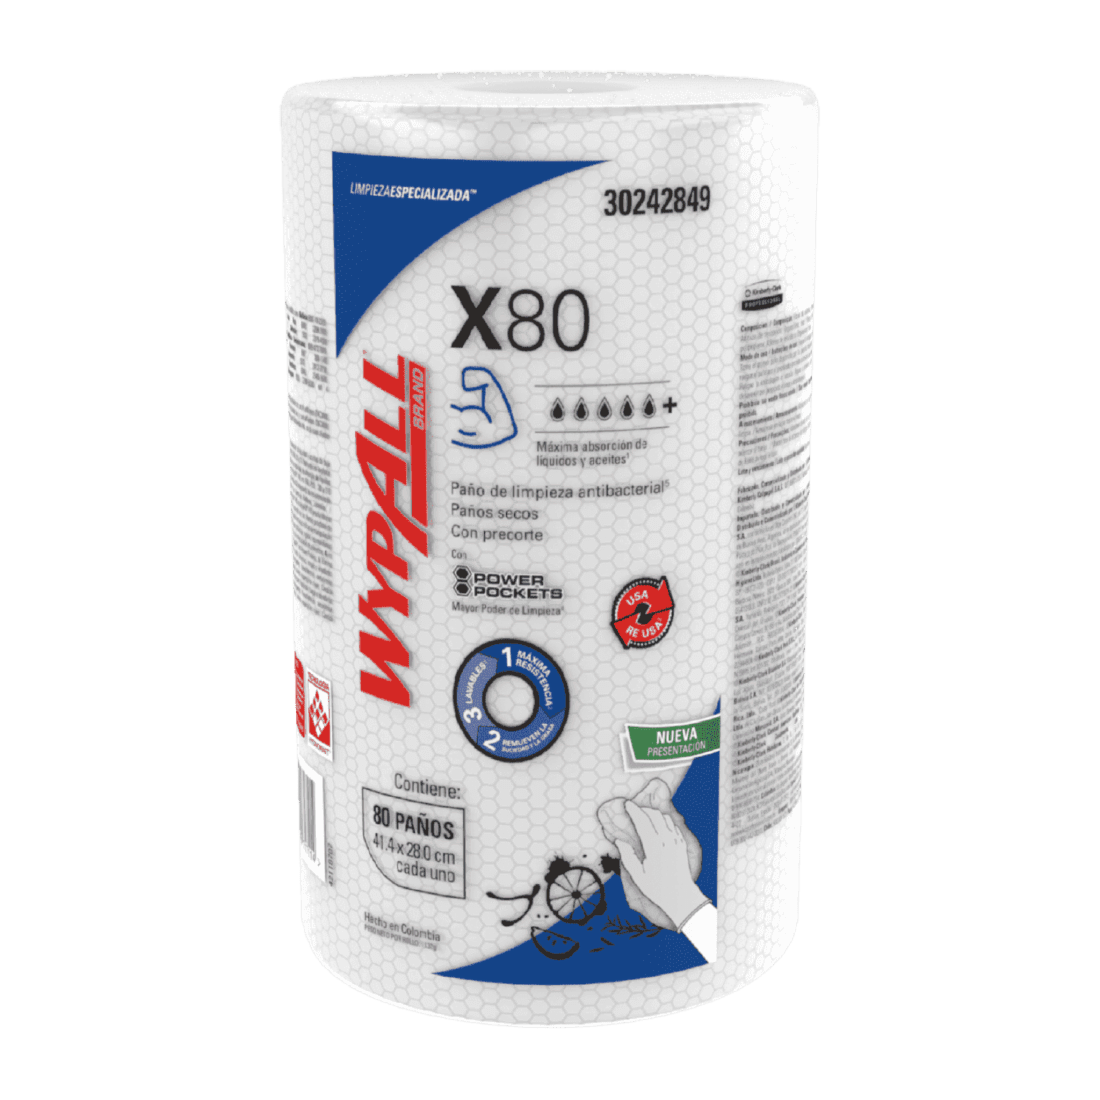 KCP TOALLA WYPAL X80 1X80 ANTIBACTERIAL 30242849